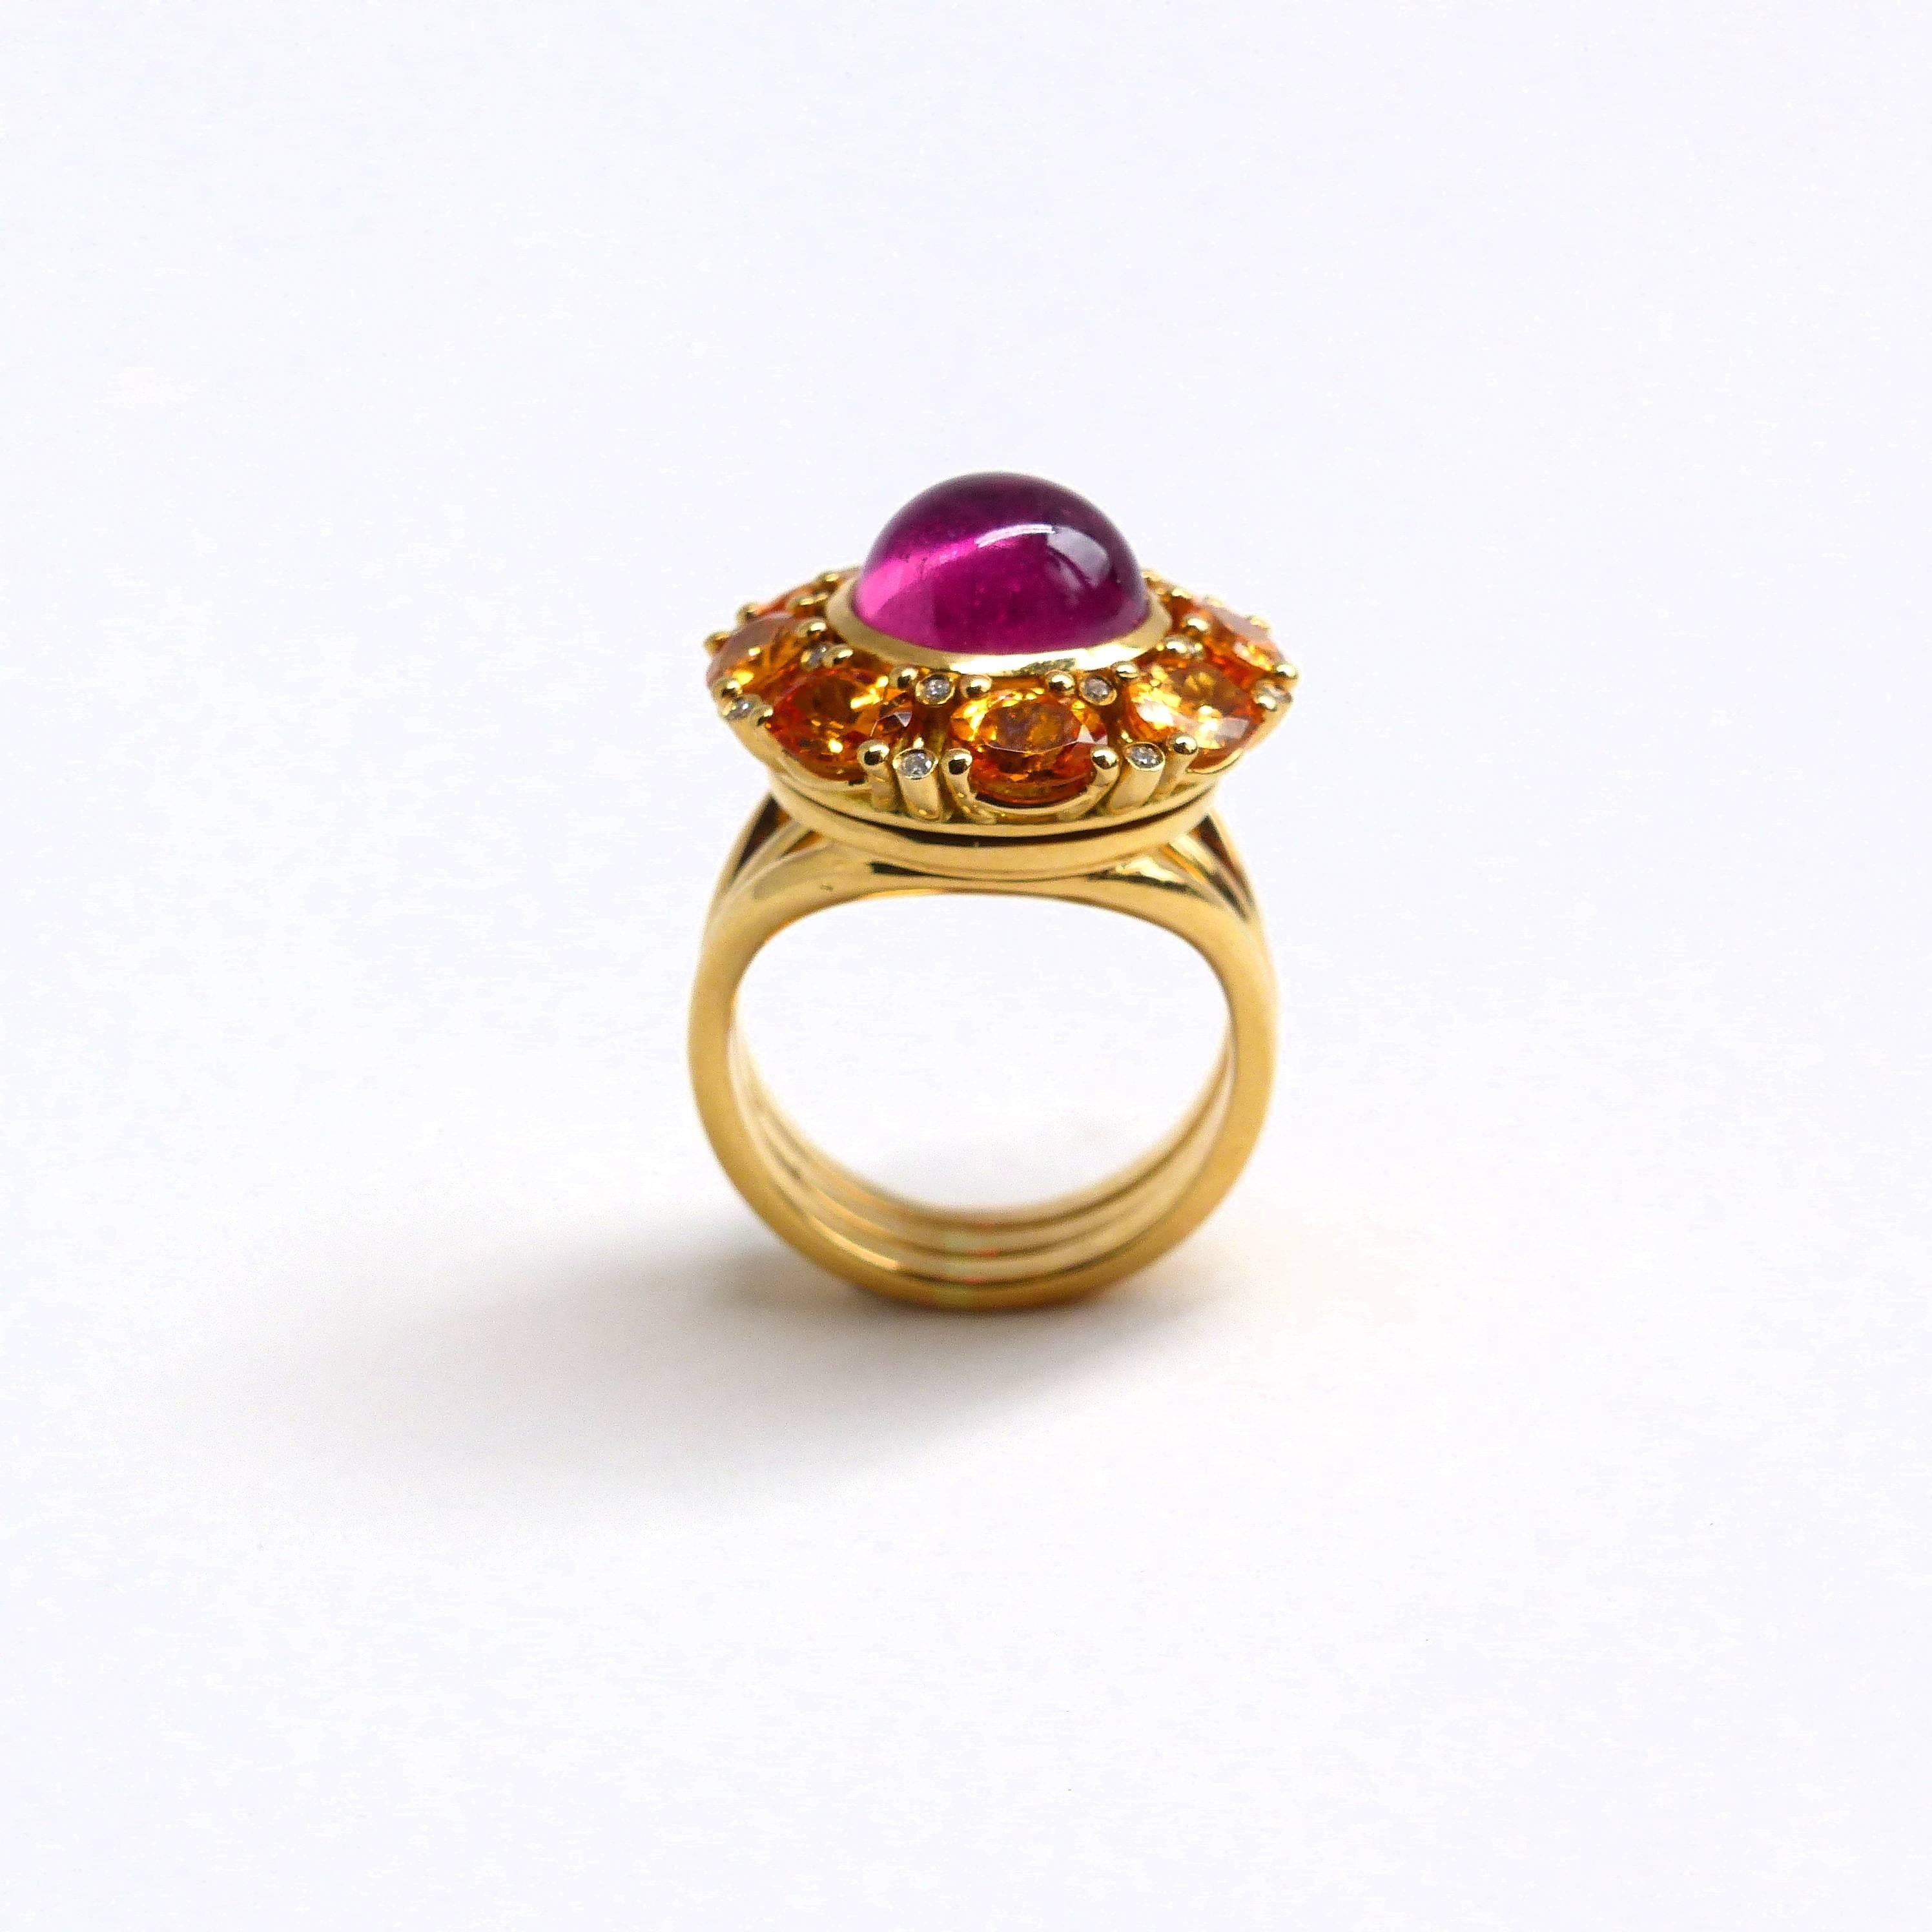 Thomas Leyser is renowned for his contemporary jewellery designs utilizing fine gemstones. 

This 18k rose gold ring (19.38g) is set with 1x Rubellite Cabouchon (round, 10mm, 4.60ct) and 8x Mandarin Garnets (facetted, oval, 5x4mm, 3.52ct) + 16x